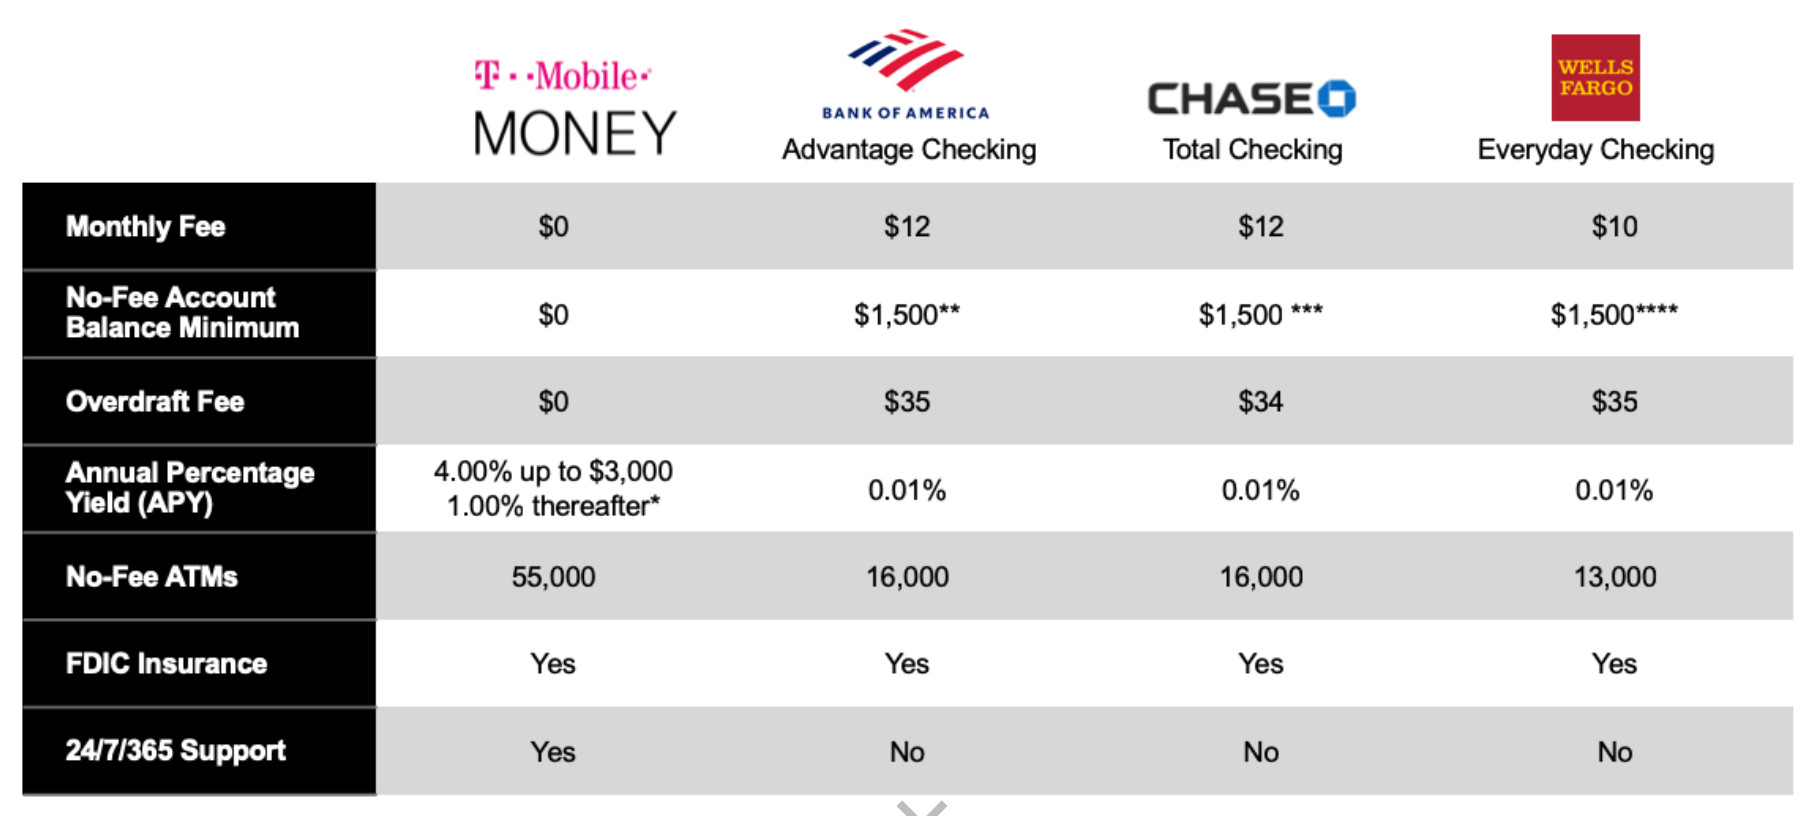 T-Mobile introduces T-Mobile Money - T-Mobile introduces its no-fee banking service